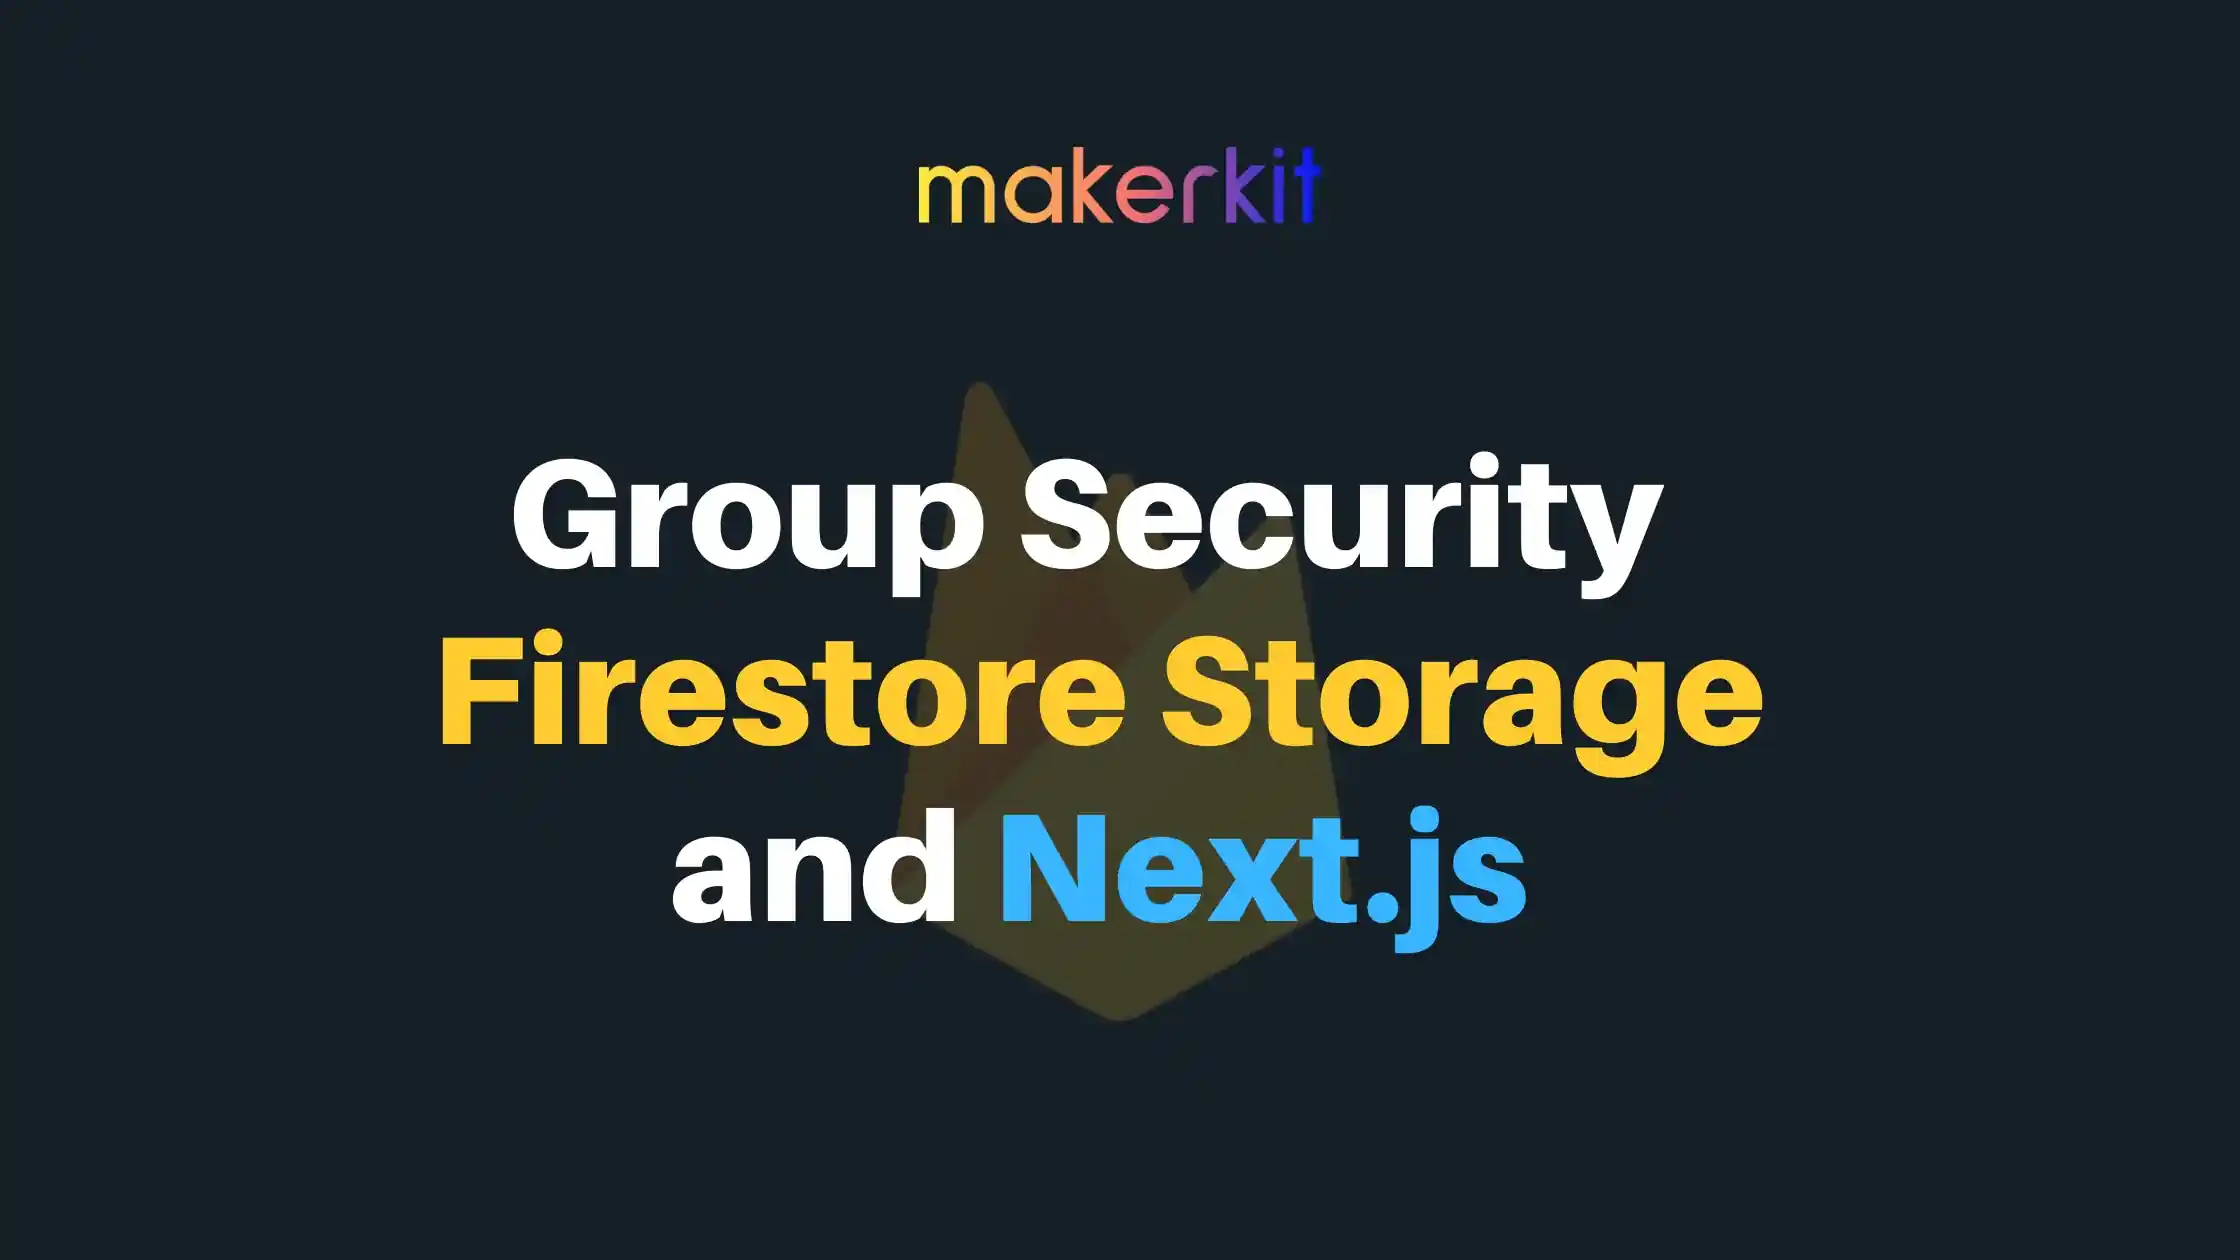 Cover Image for Group Security with Firestore Storage and Next.js